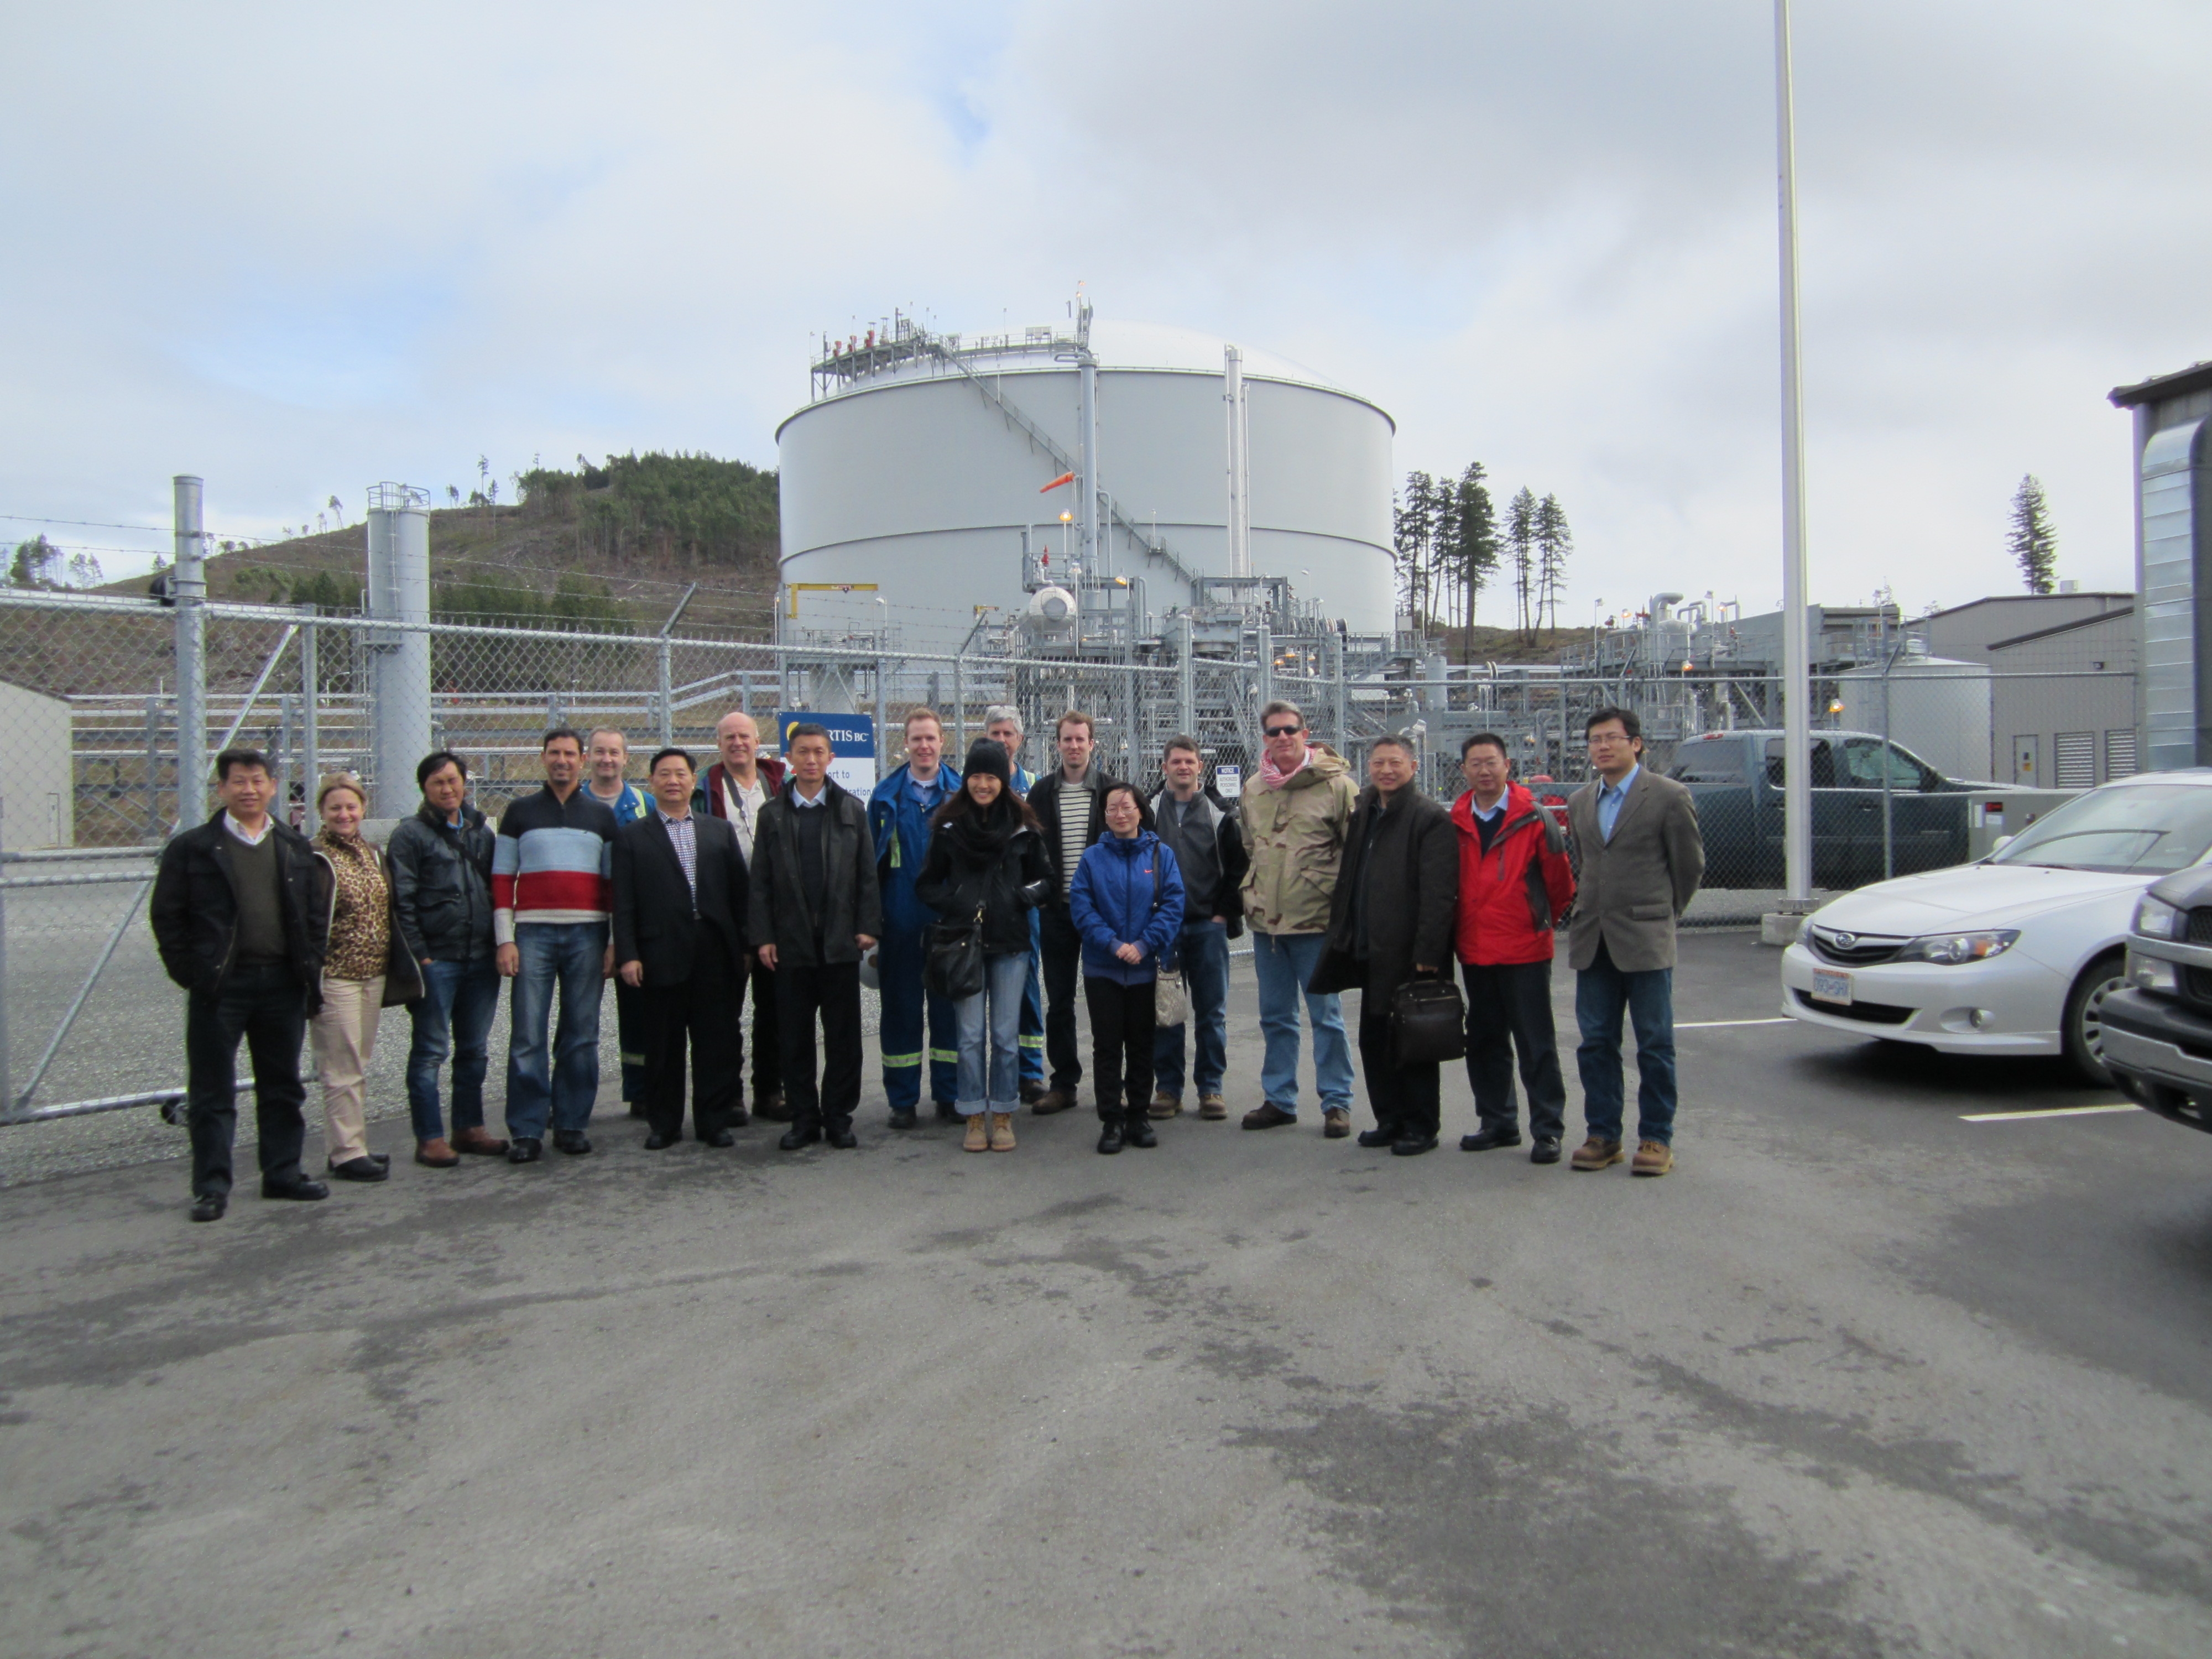 Expo attendees touring the Fortis Mt. Hayes LNG facility